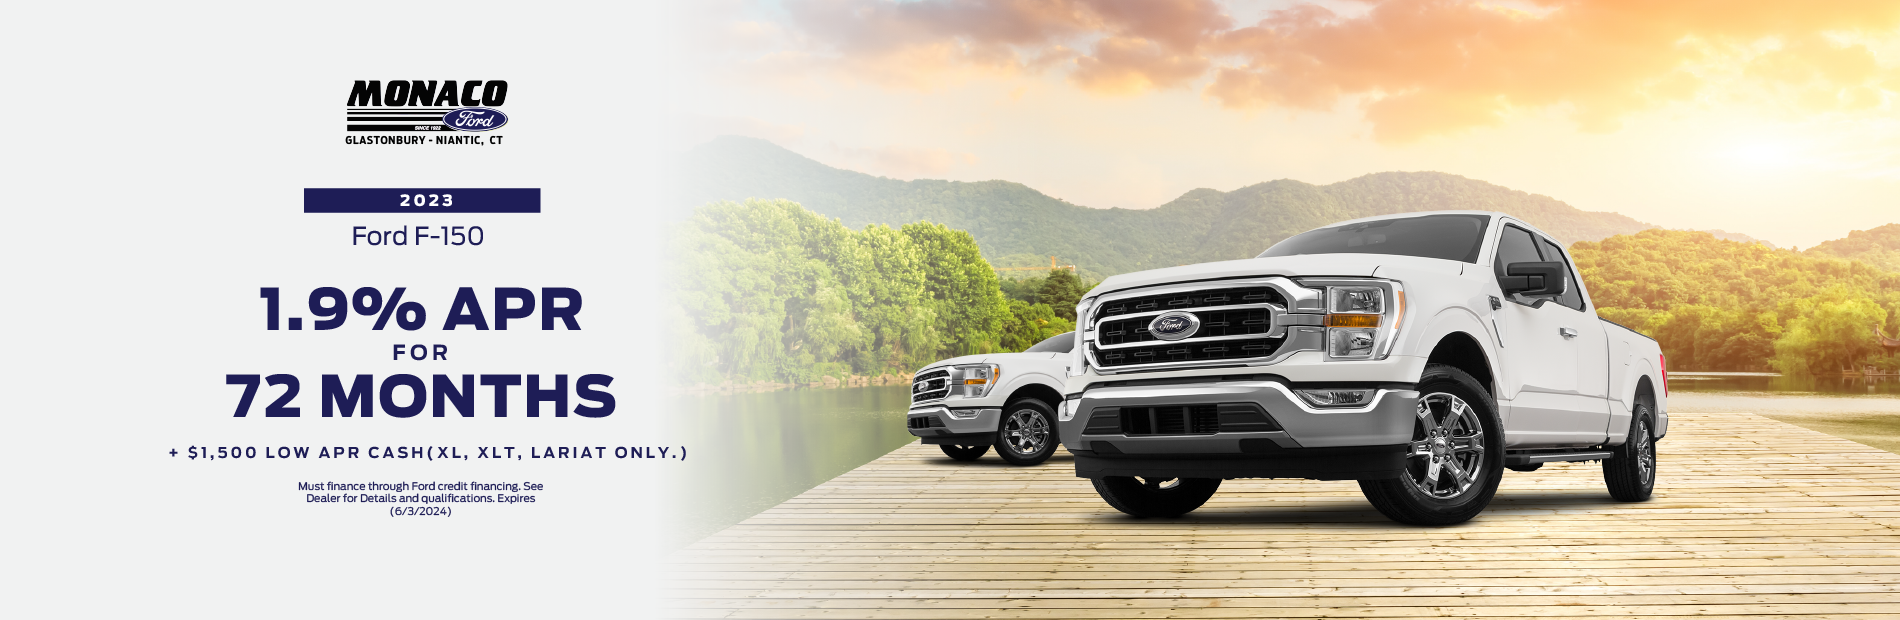 2023 Ford F-150 Truck 1.9% APR for 72 Months + $1,500 Low AP